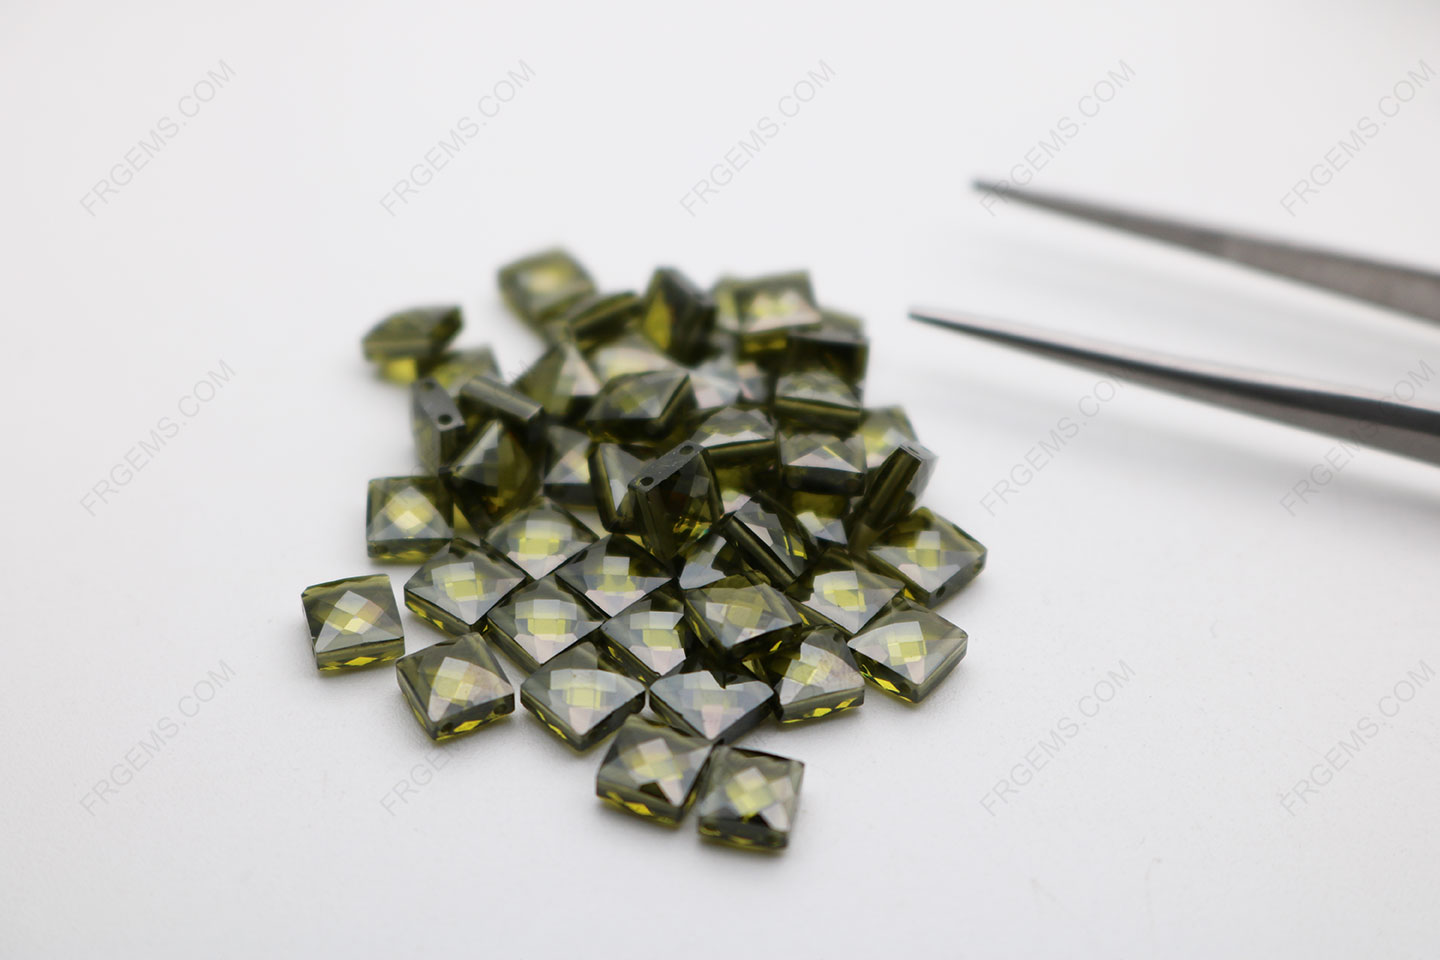 Cubic Zirconia Peridot Square Shape Double Checkerboard faceted cut 5x5mm stones CZ27 IMG_2784